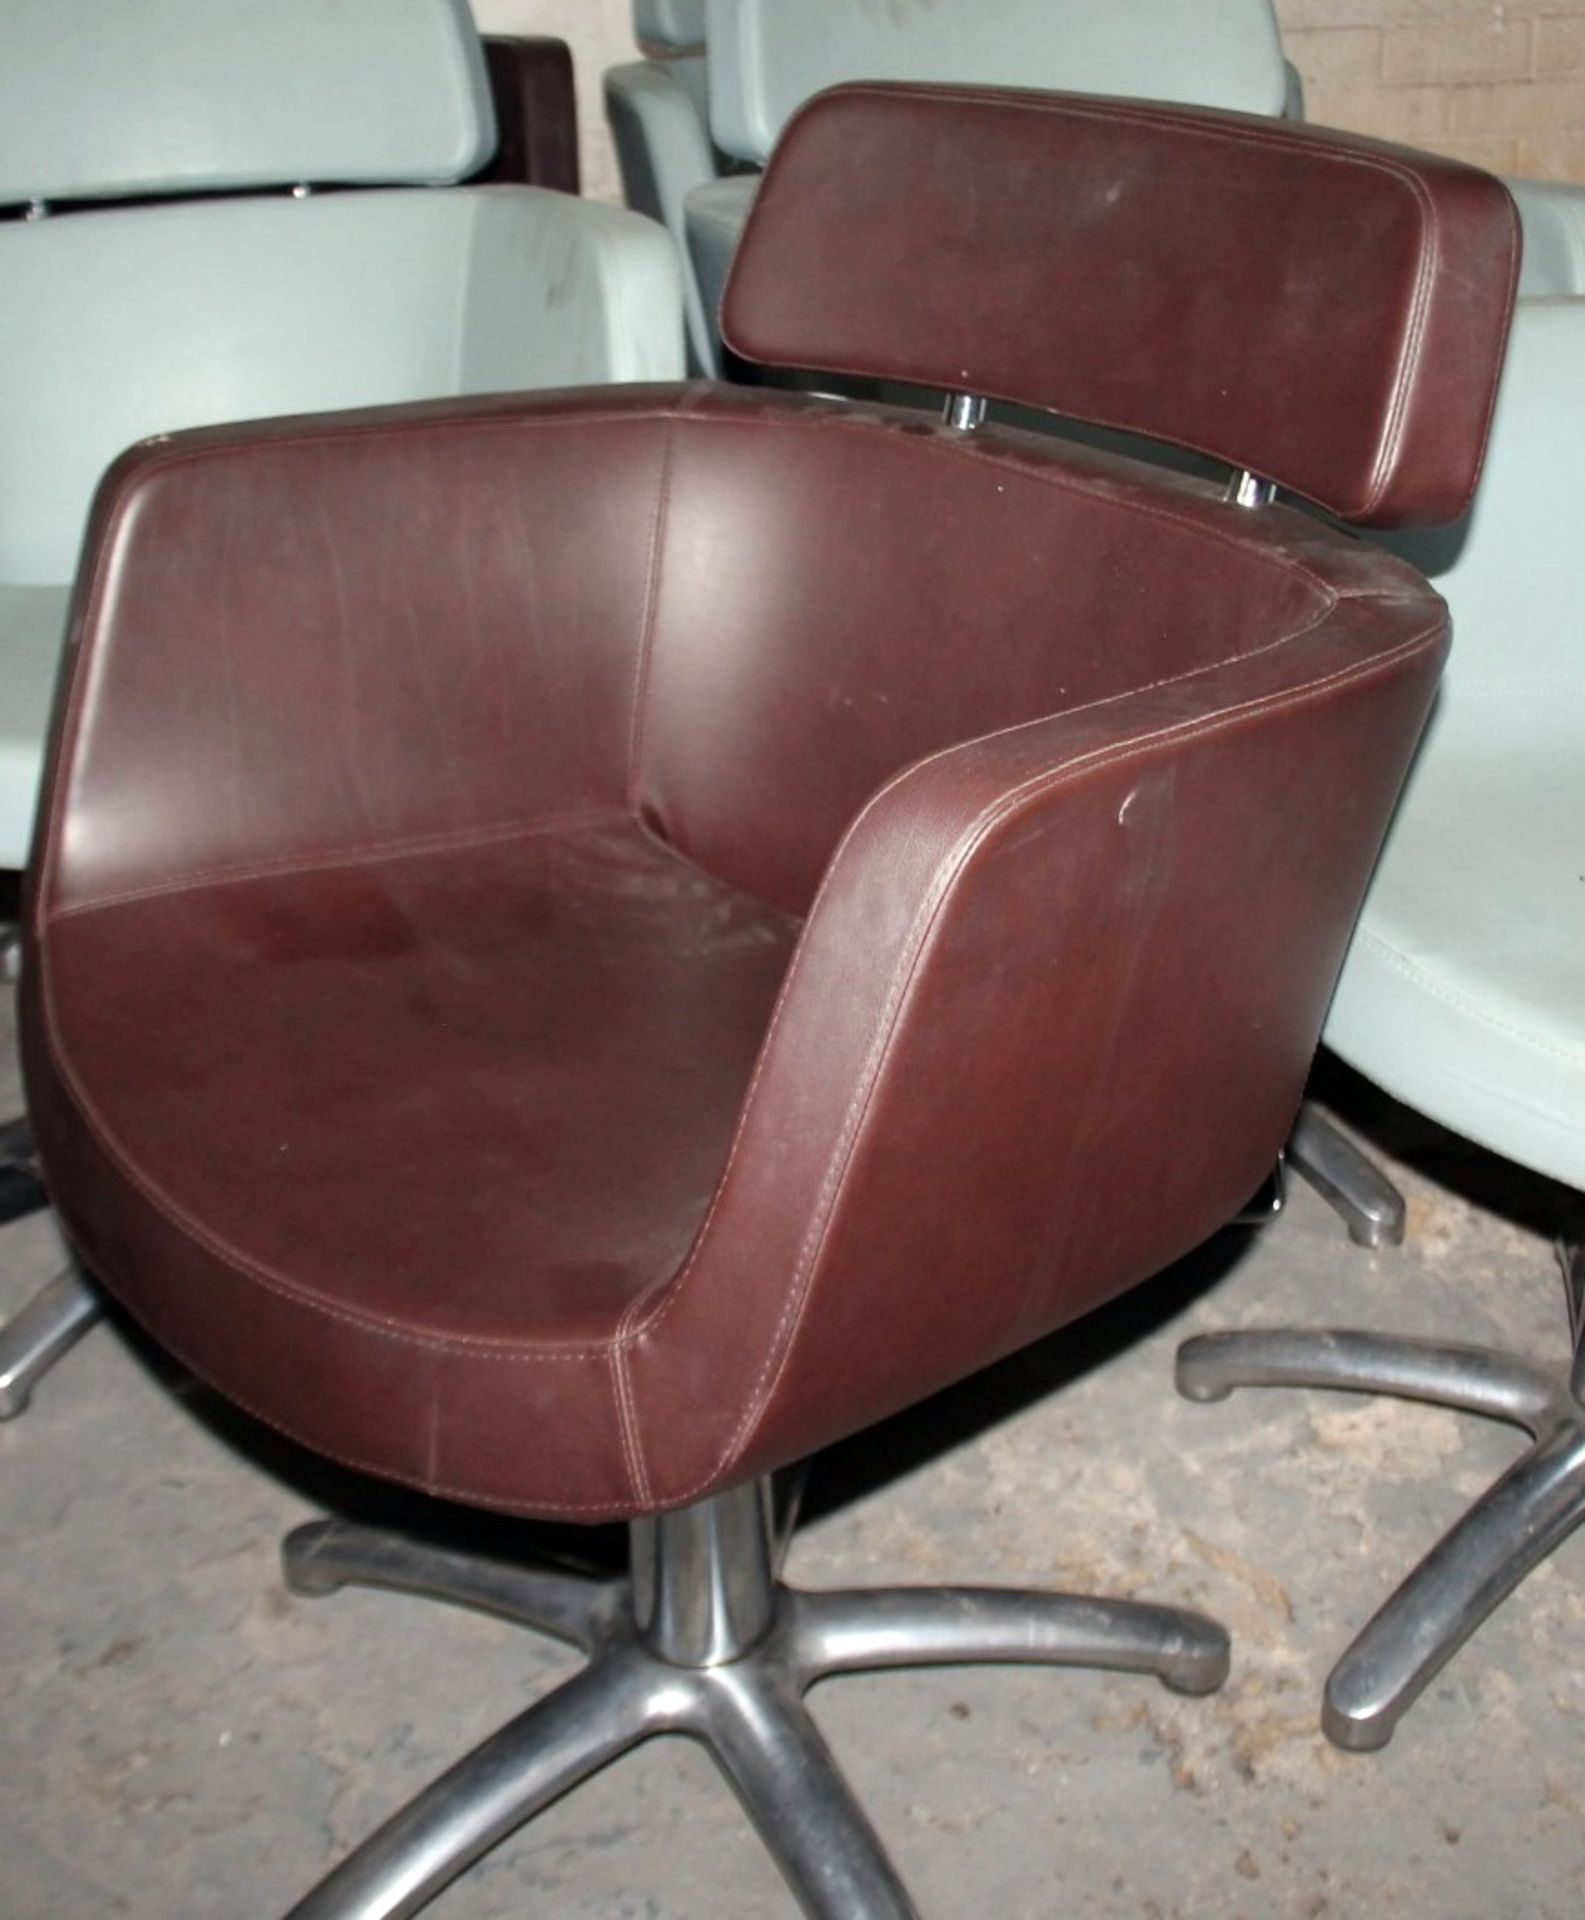 5 x Malet Branded Professional Hairdressing Salon Swivel Chairs In Brown / Blue *Please Read Full - Image 4 of 4